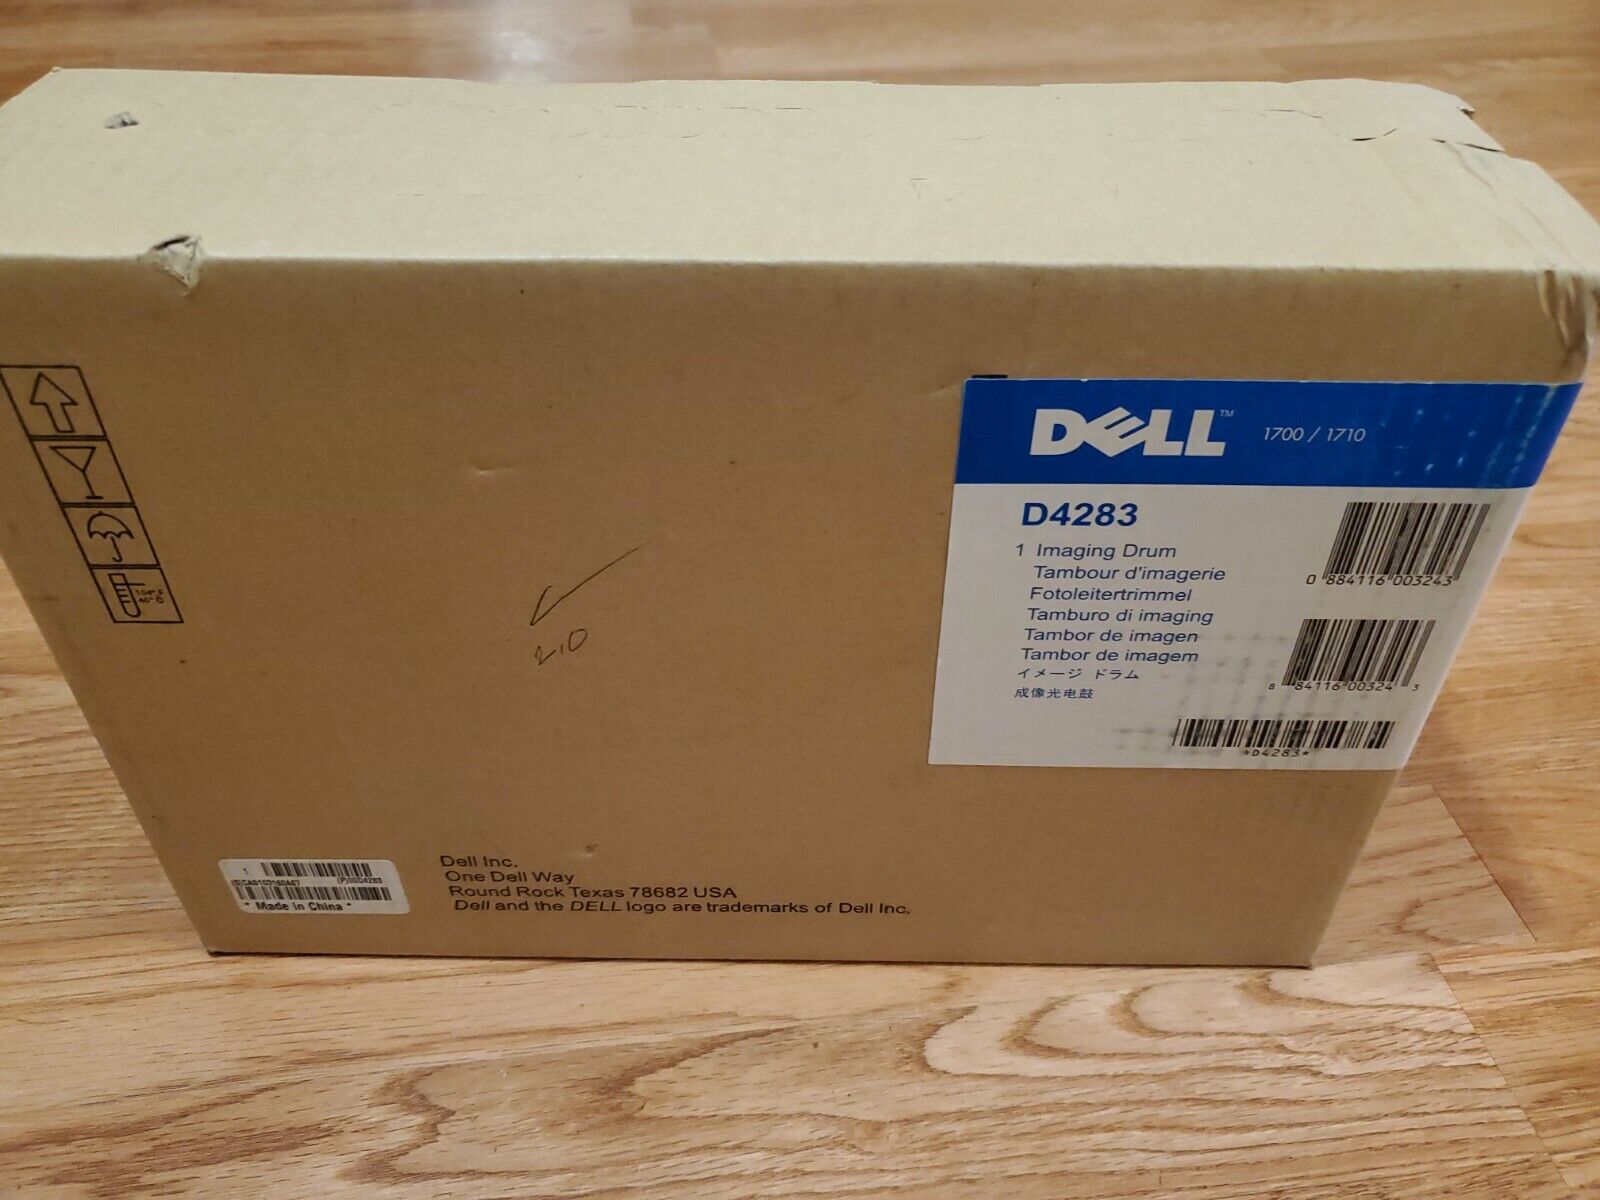 DELL D4283 Imaging Drum Unit BLACK for 1700/1710 in FACTORY SEALED BOX